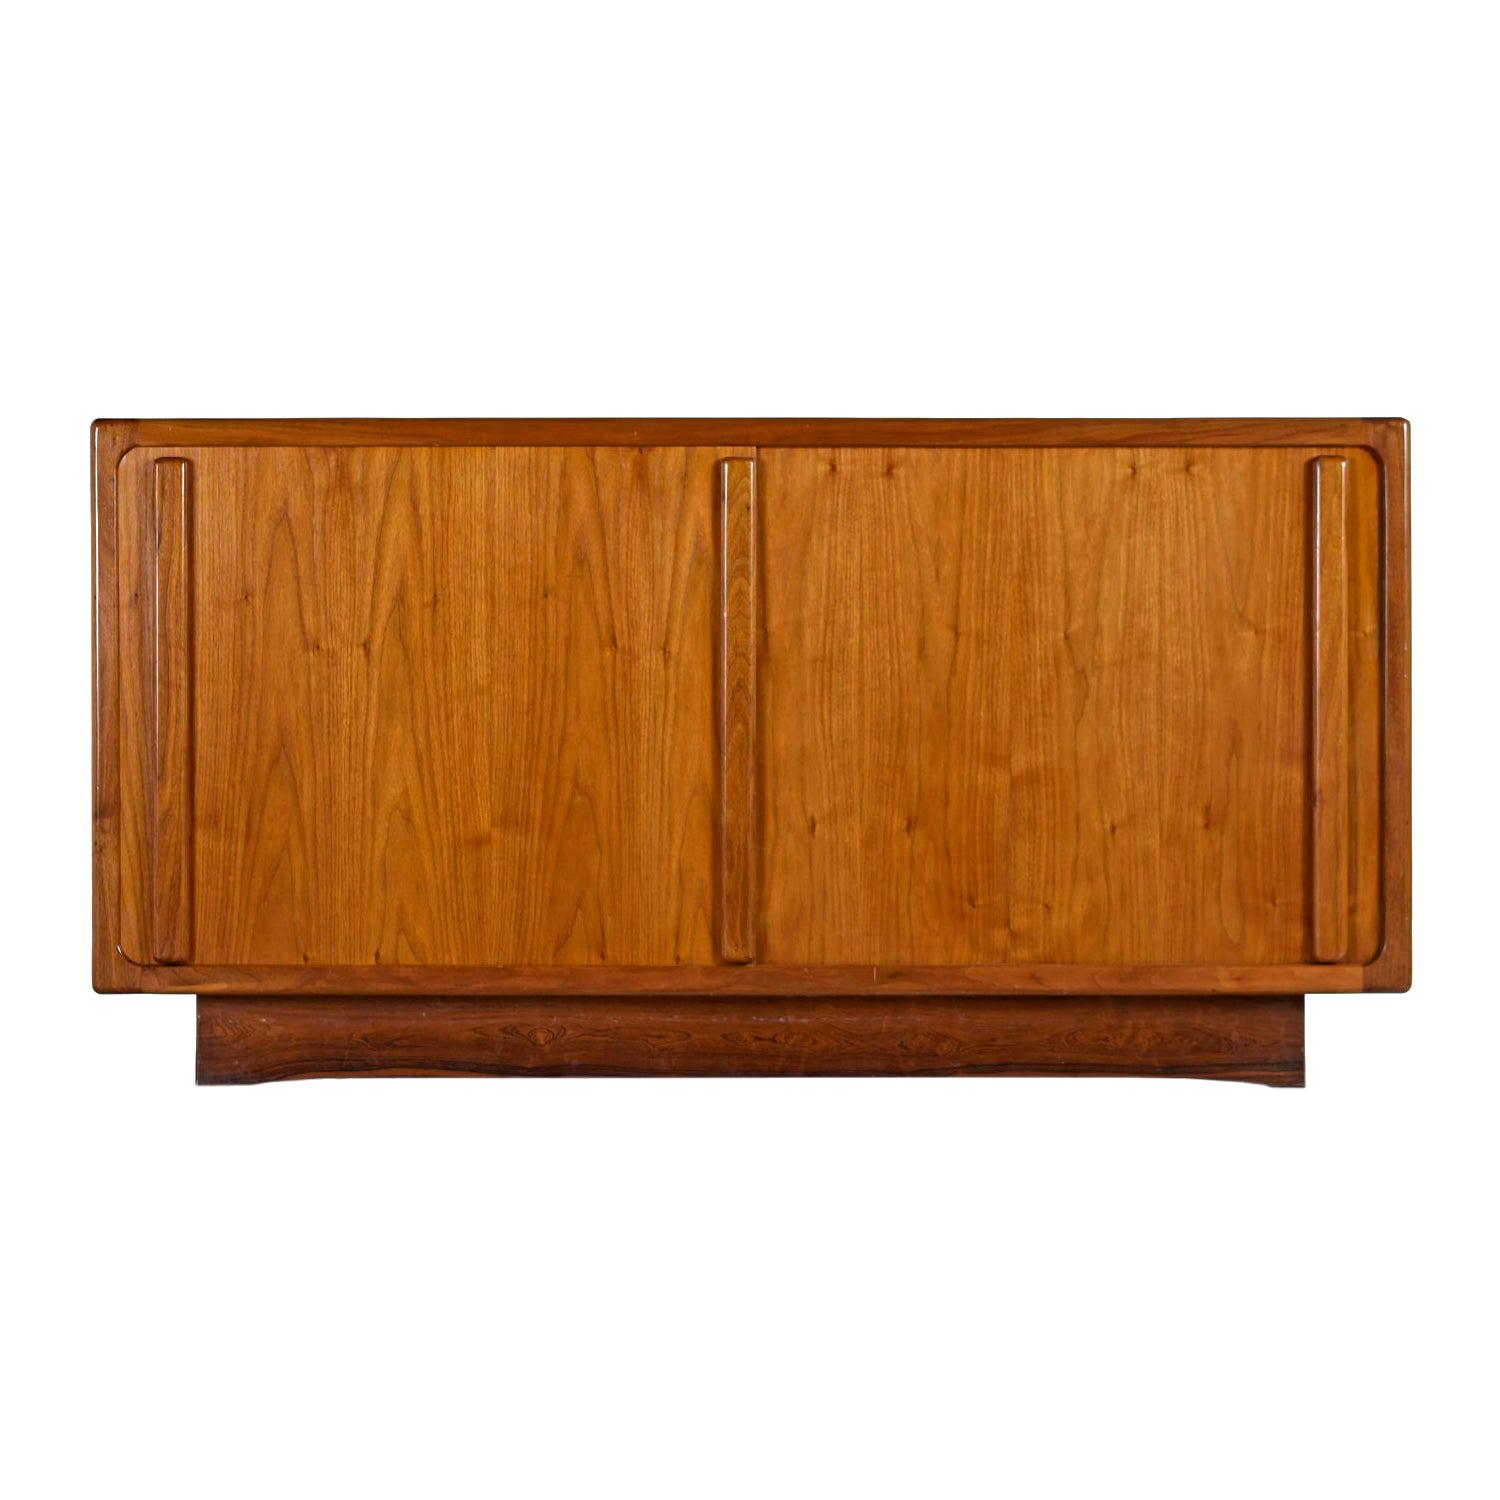 Expertly crafted vintage teak credenza. The unit features convenient sliding doors that conceal cabinet space to the left and right. Use it as a dresser in the bedroom, TV stand in the living room or buffet in the dining room. Tons of room for